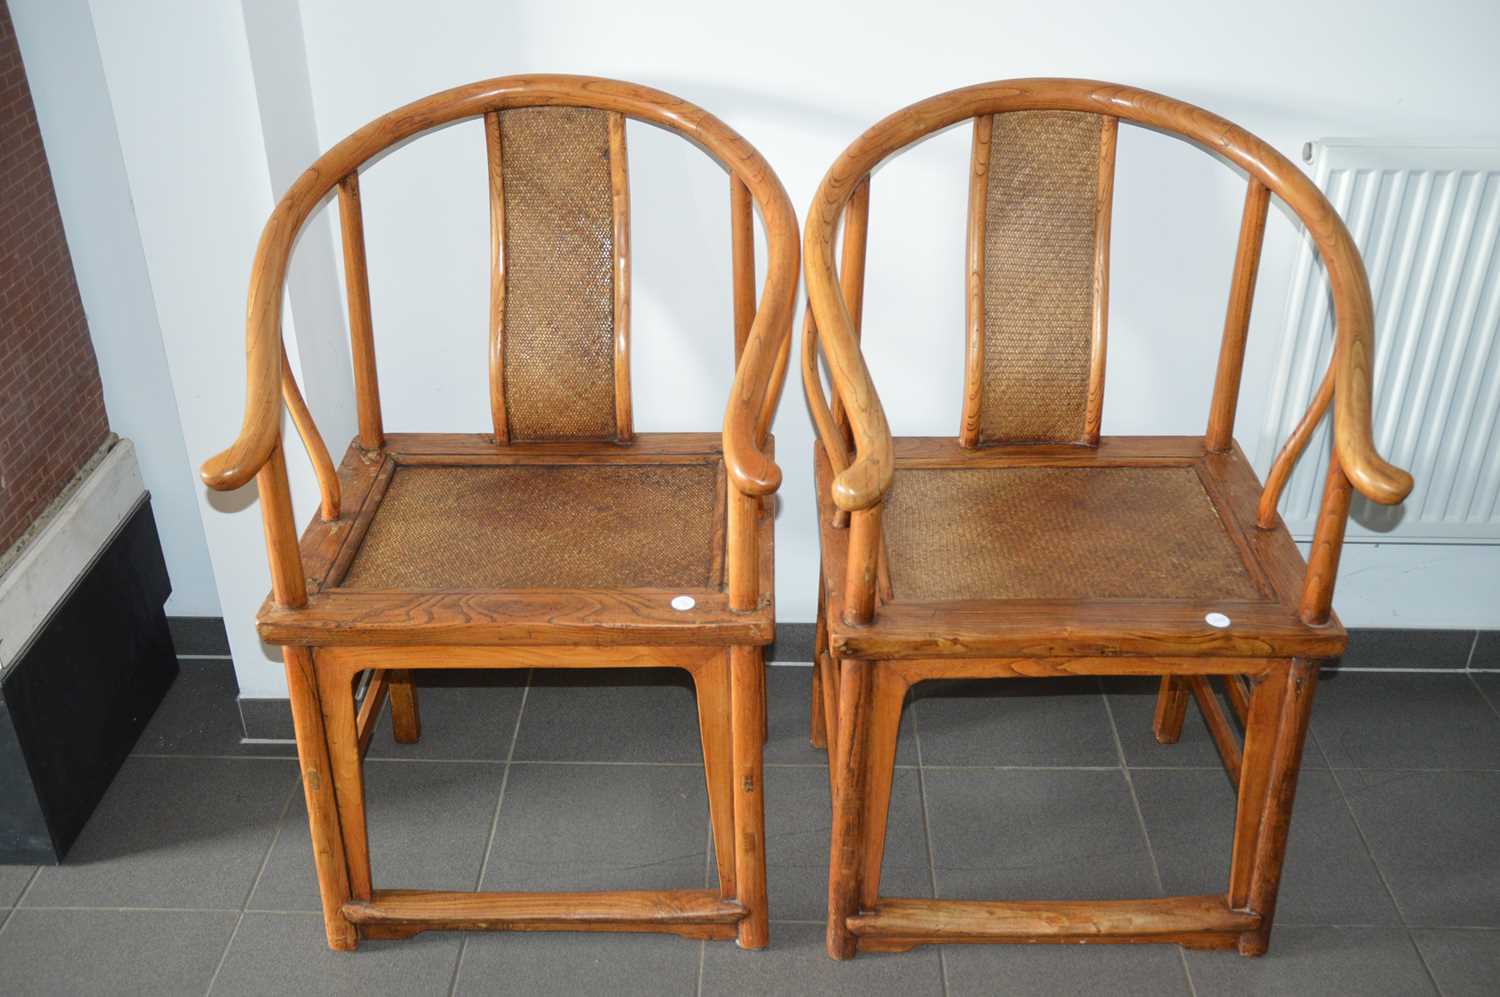 Lot 53 - A pair of late 19th century Chinese elm horseshoe back chairs